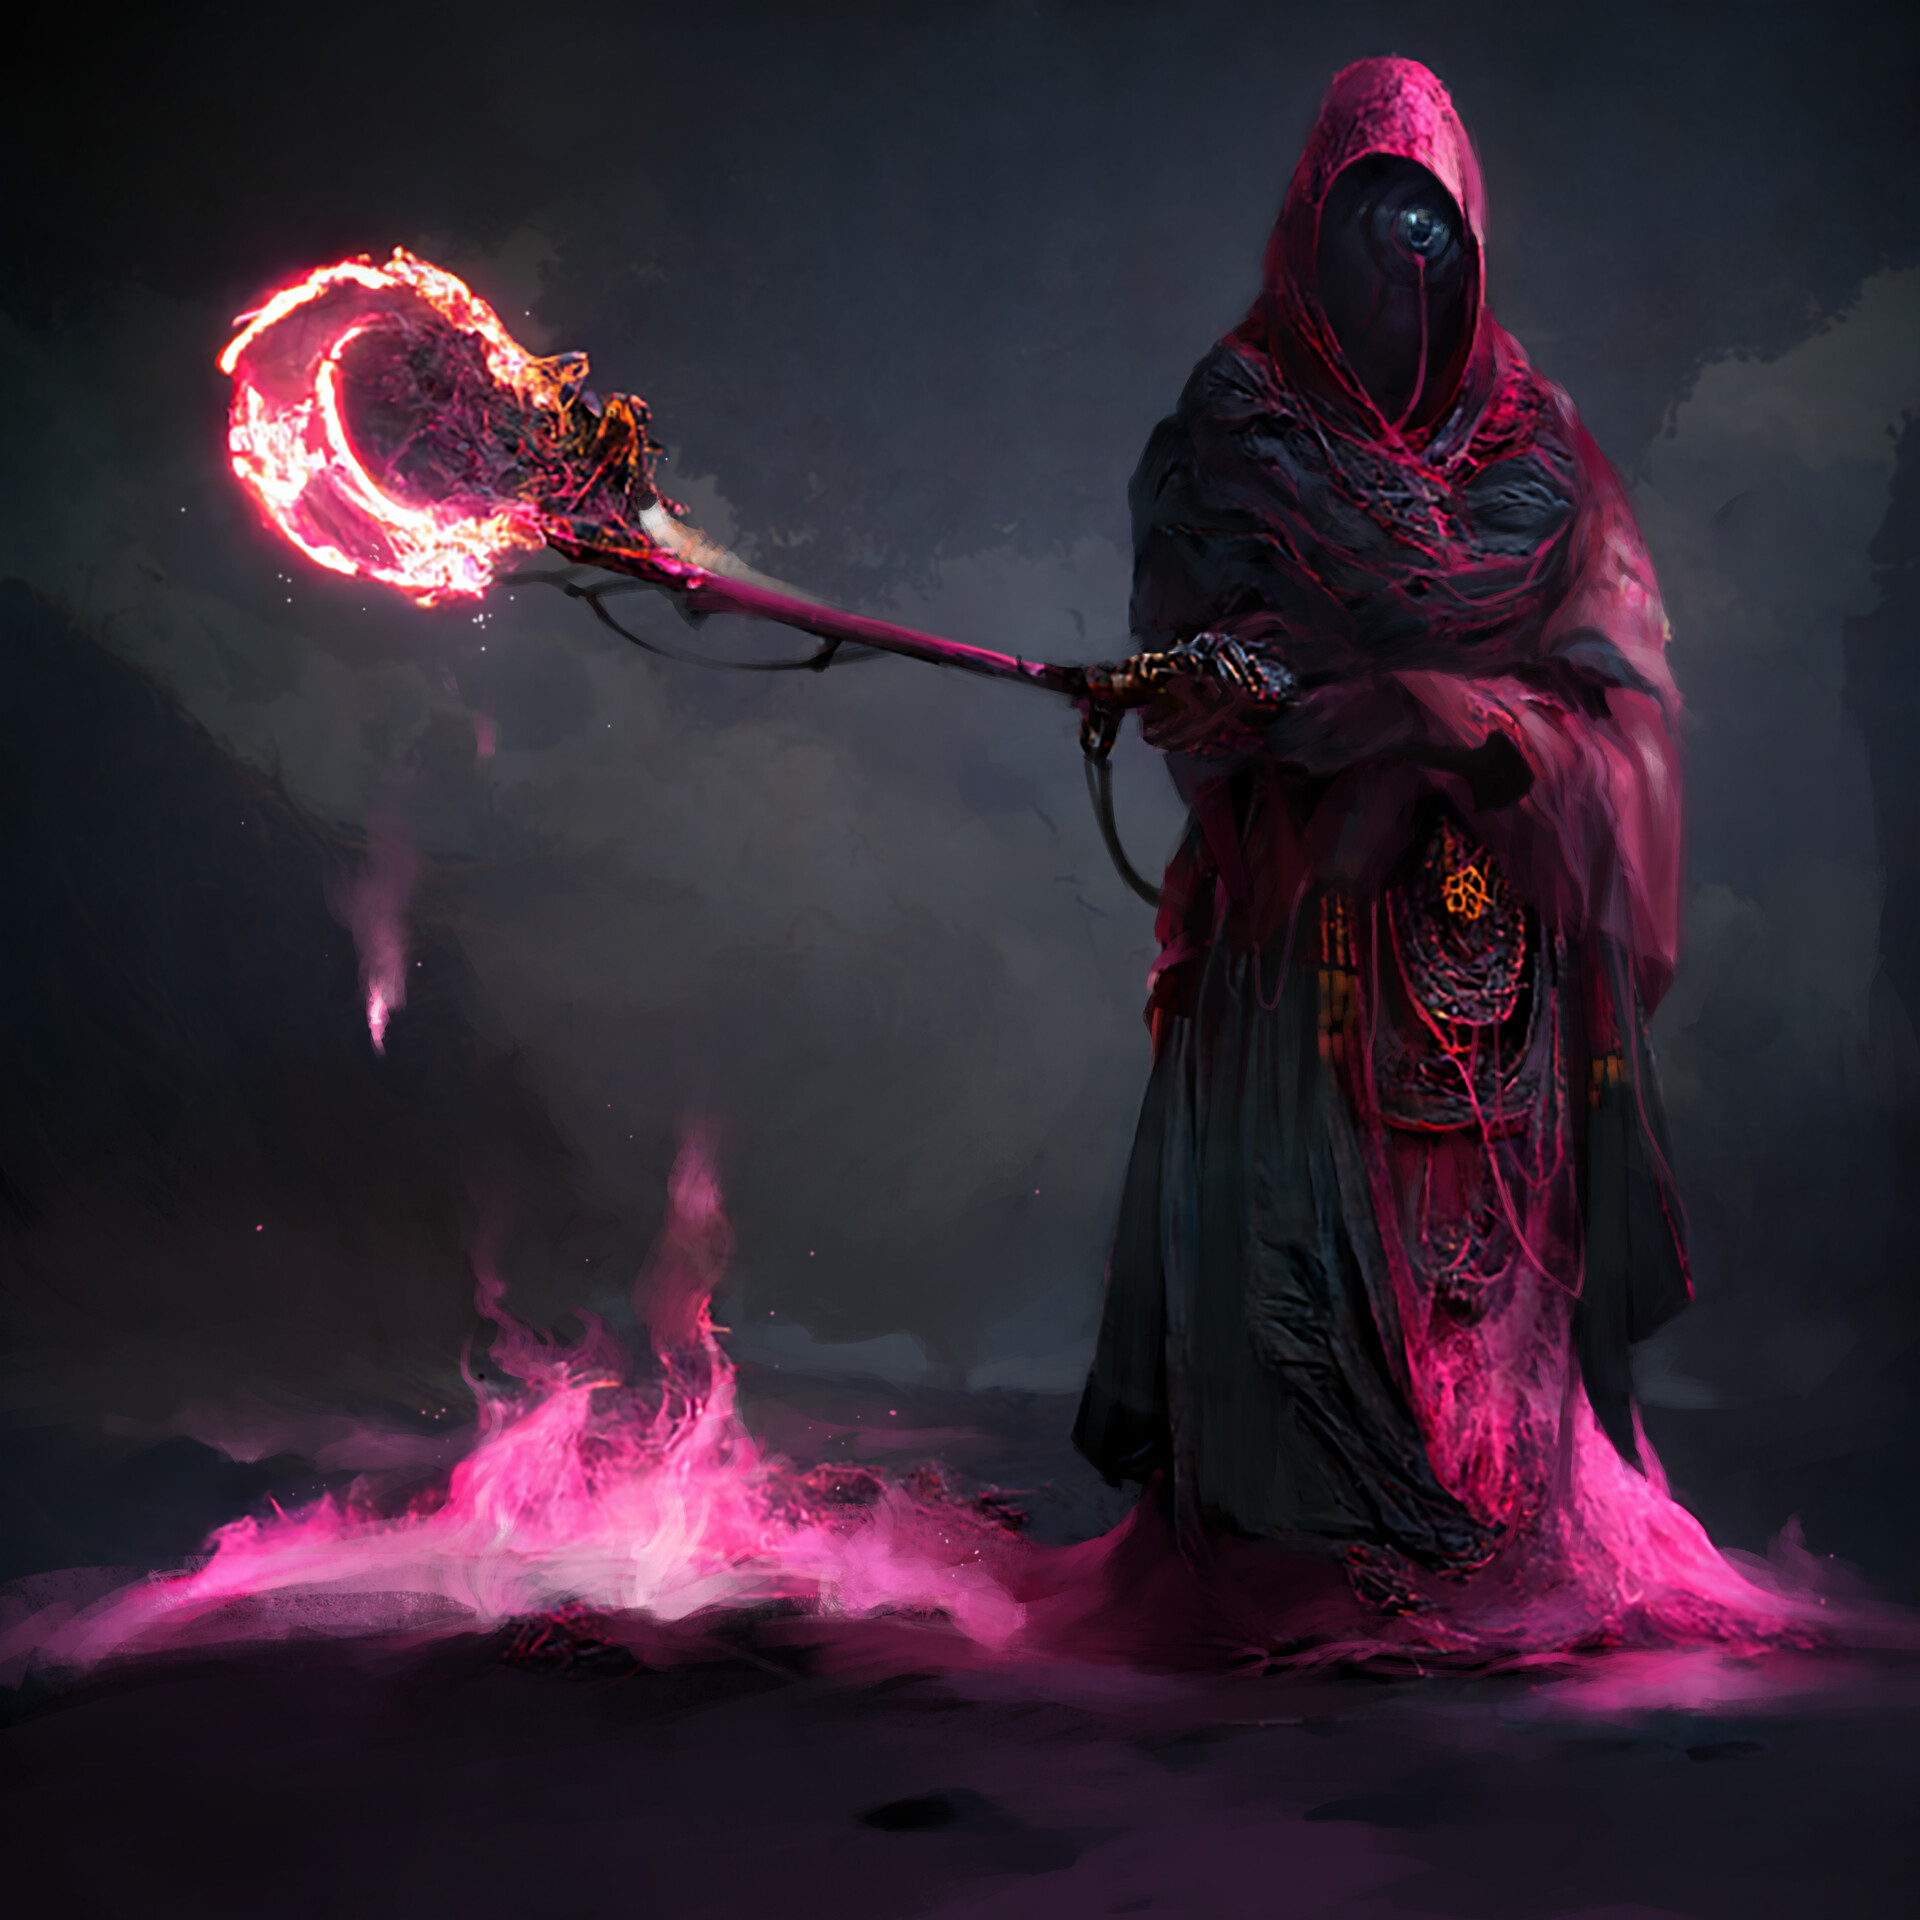 ArtStation - Priest of the pink flame